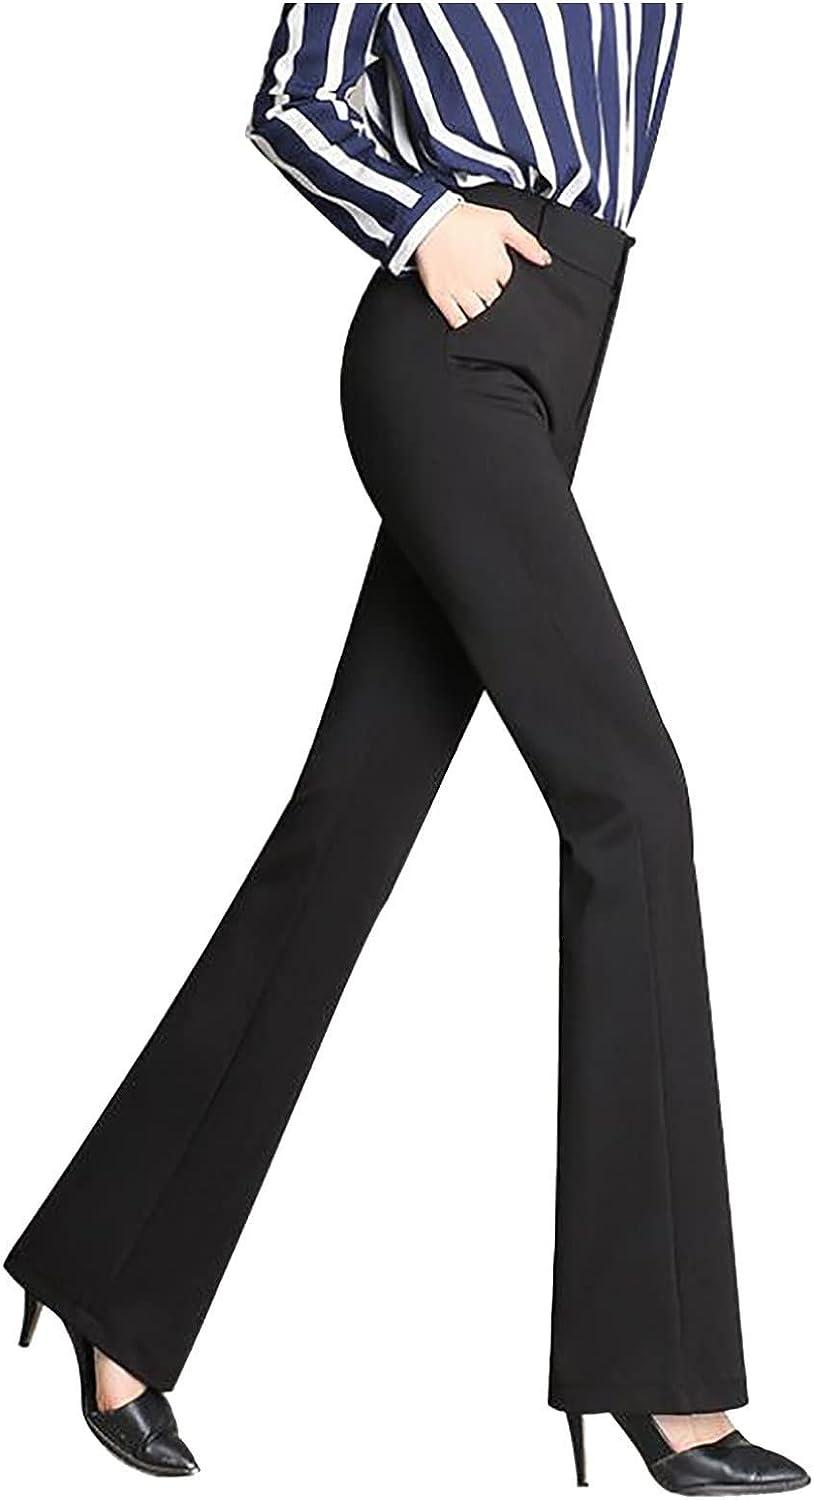 Black Relaxed Fit Pants for Women, High Waist Wide Leg Pants for Women, Black  Pants High Rise, Black Pants Womens -  Canada